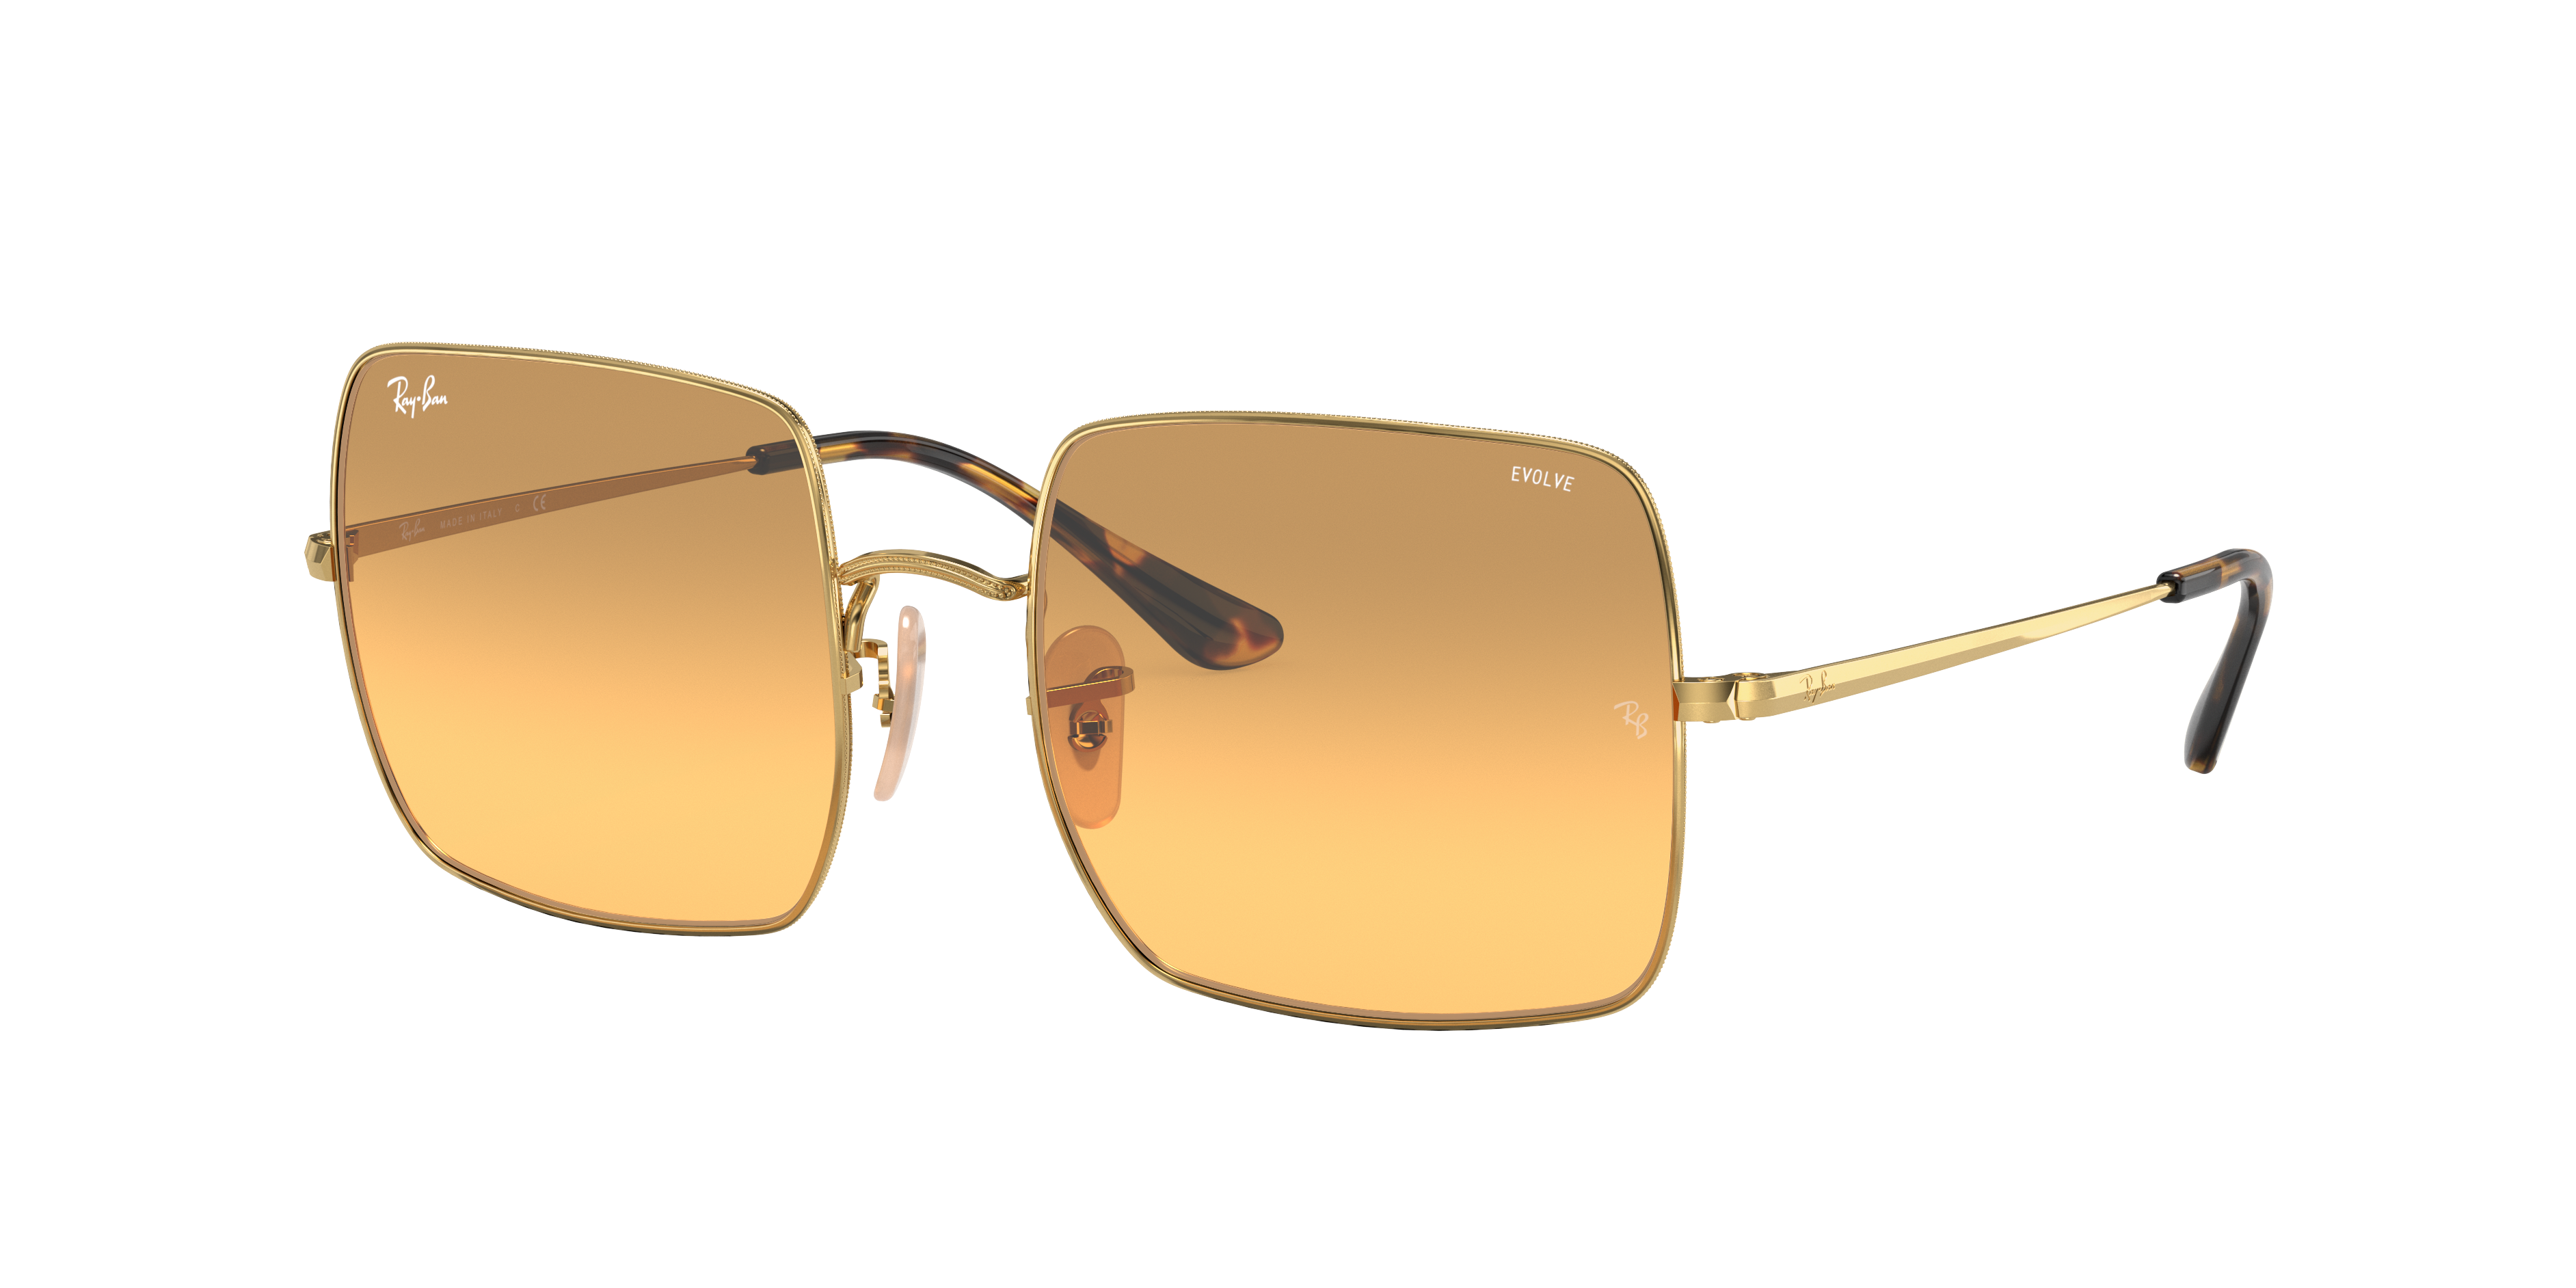 Square 1971 Washed Evolve Sunglasses in Gold and Orange Photochromic | Ray- Ban®